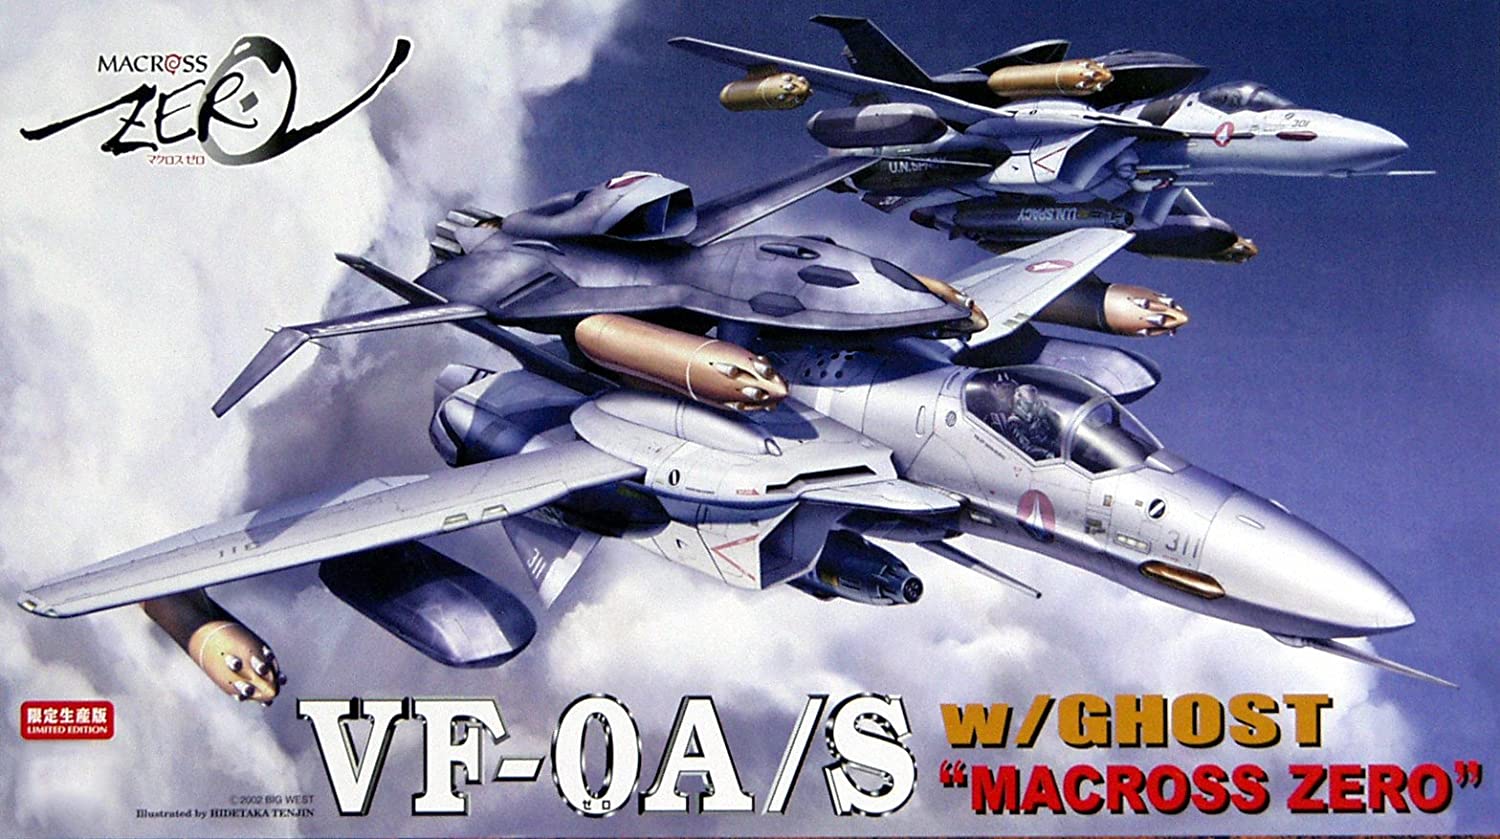 VF-0A/S w/Ghost